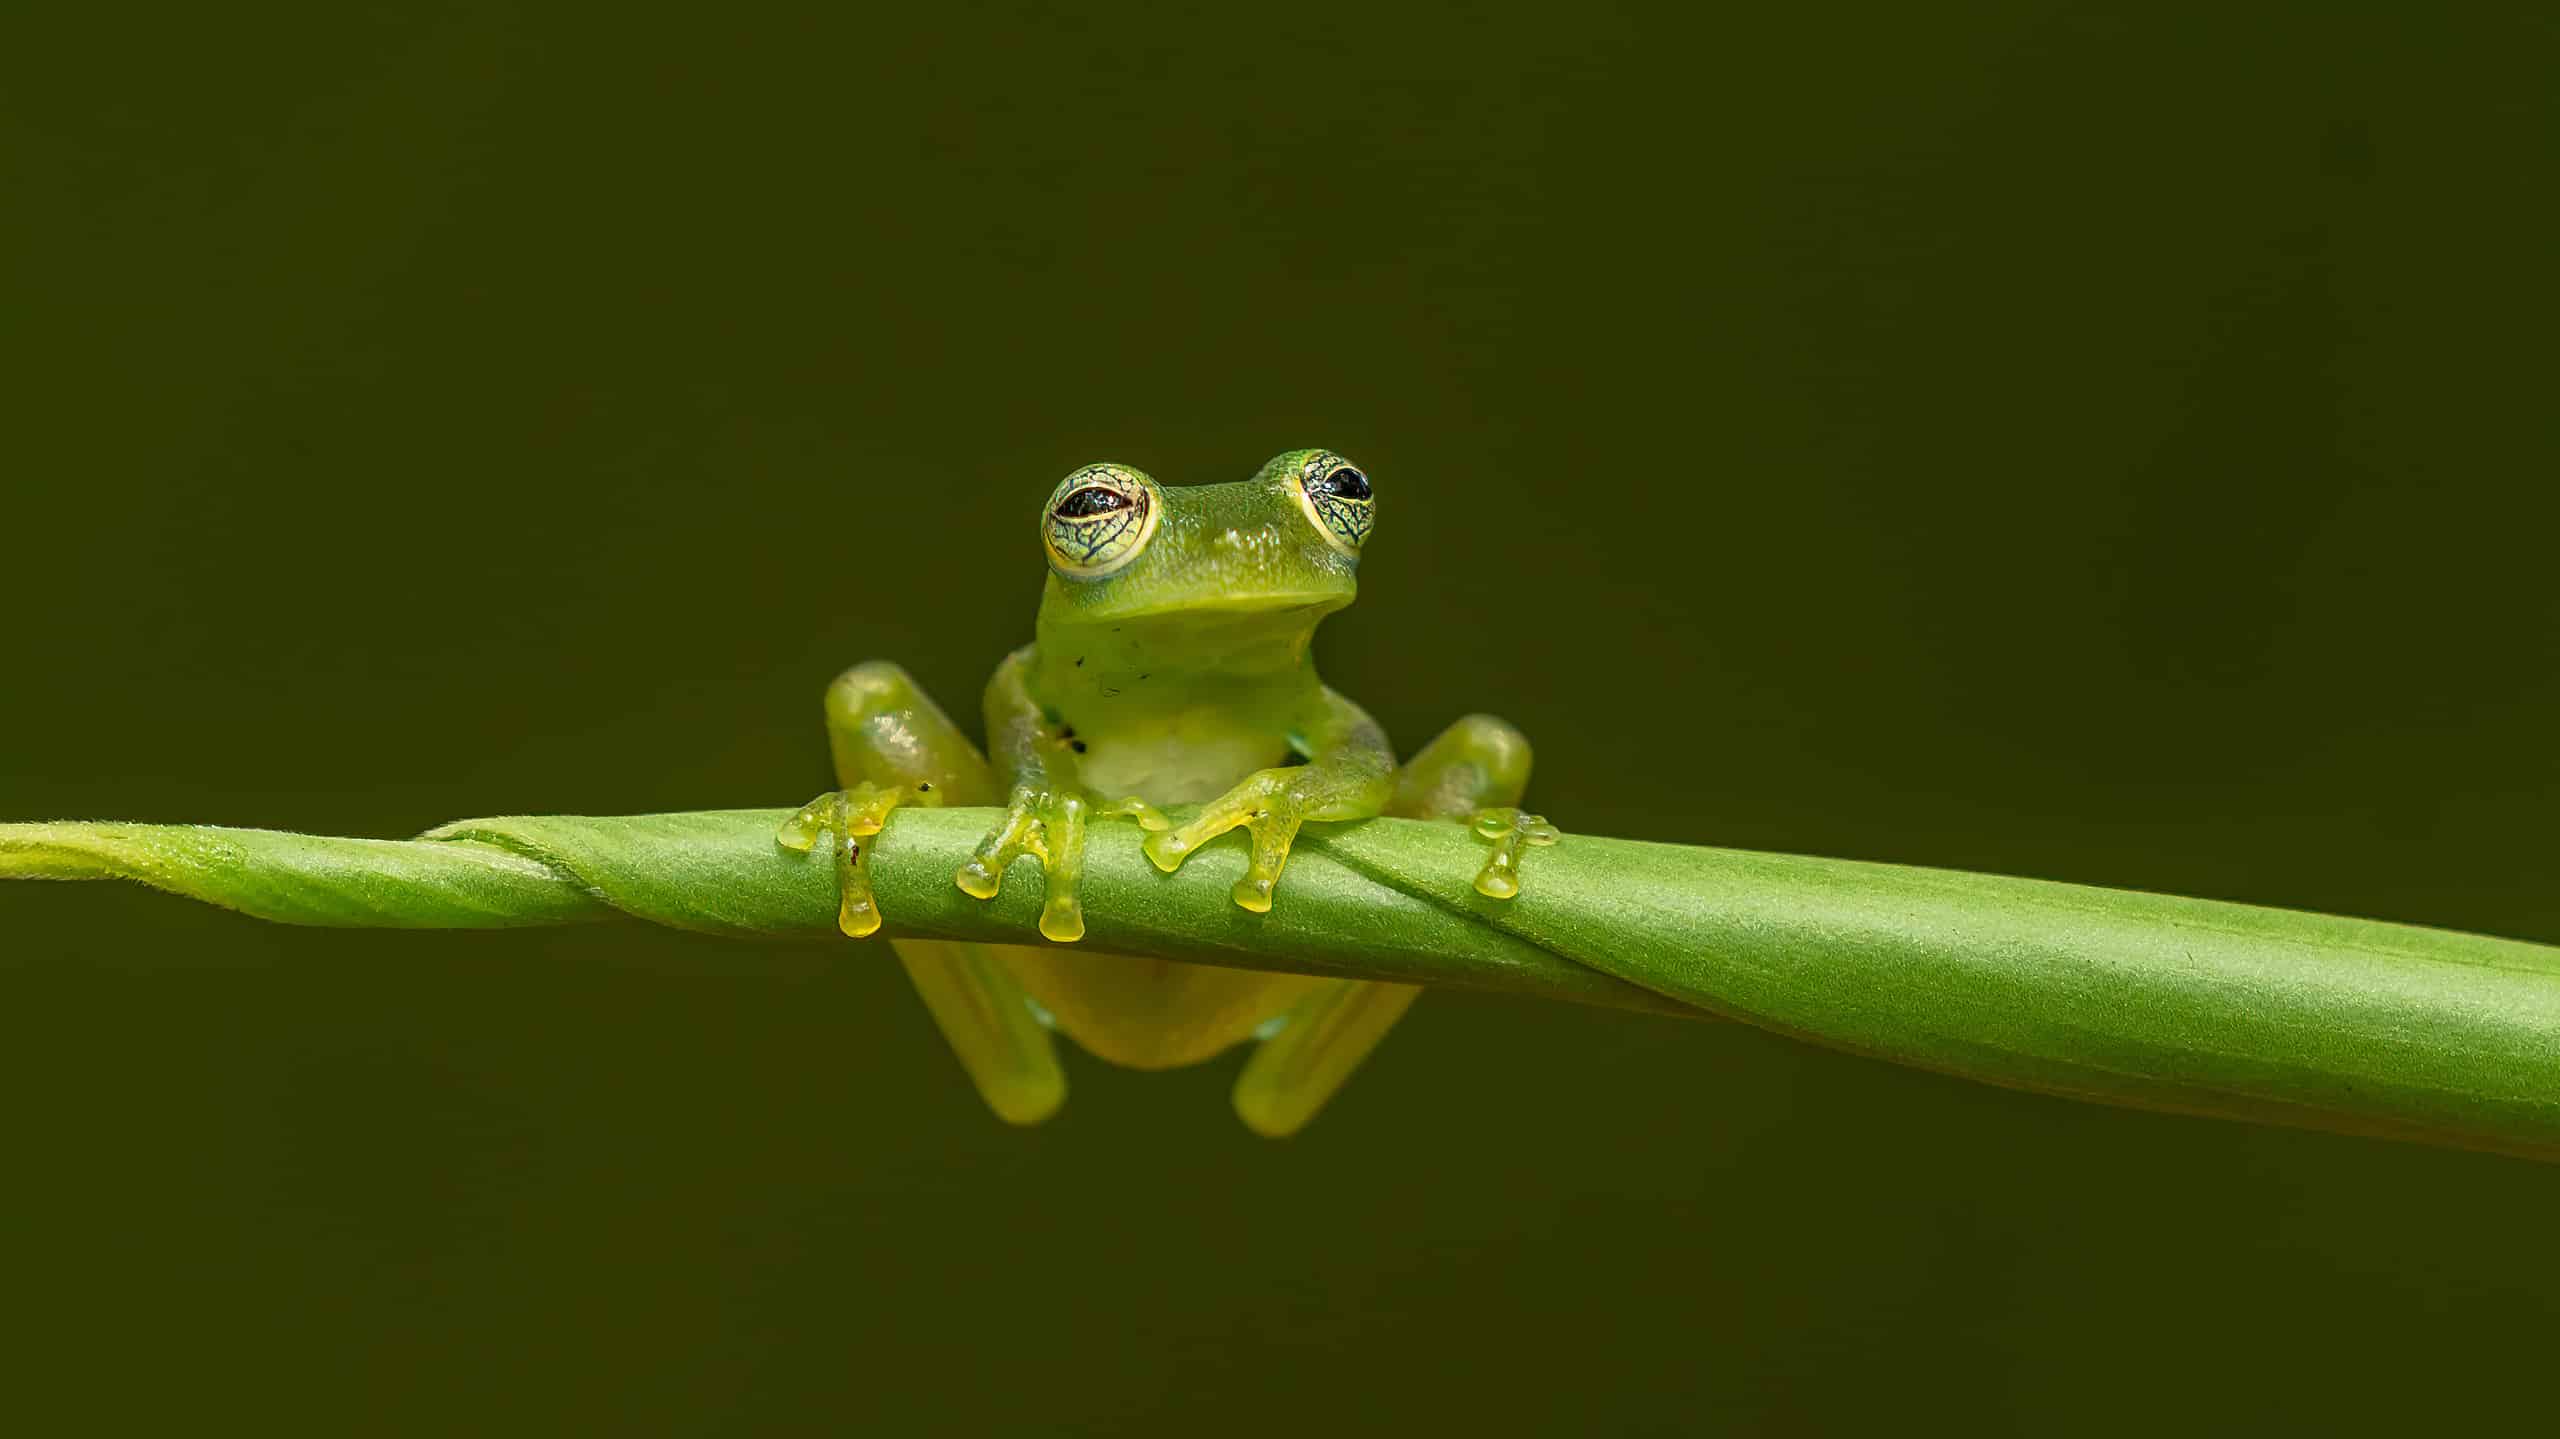 Reticulated Glass Frog - Hyalinobatrachium valerioi, beautiful small green and yellow frog from Central America forests, Costa Rica. The frog is center frame facing the camera. Its sweet/toes are visible on a green tree branch.